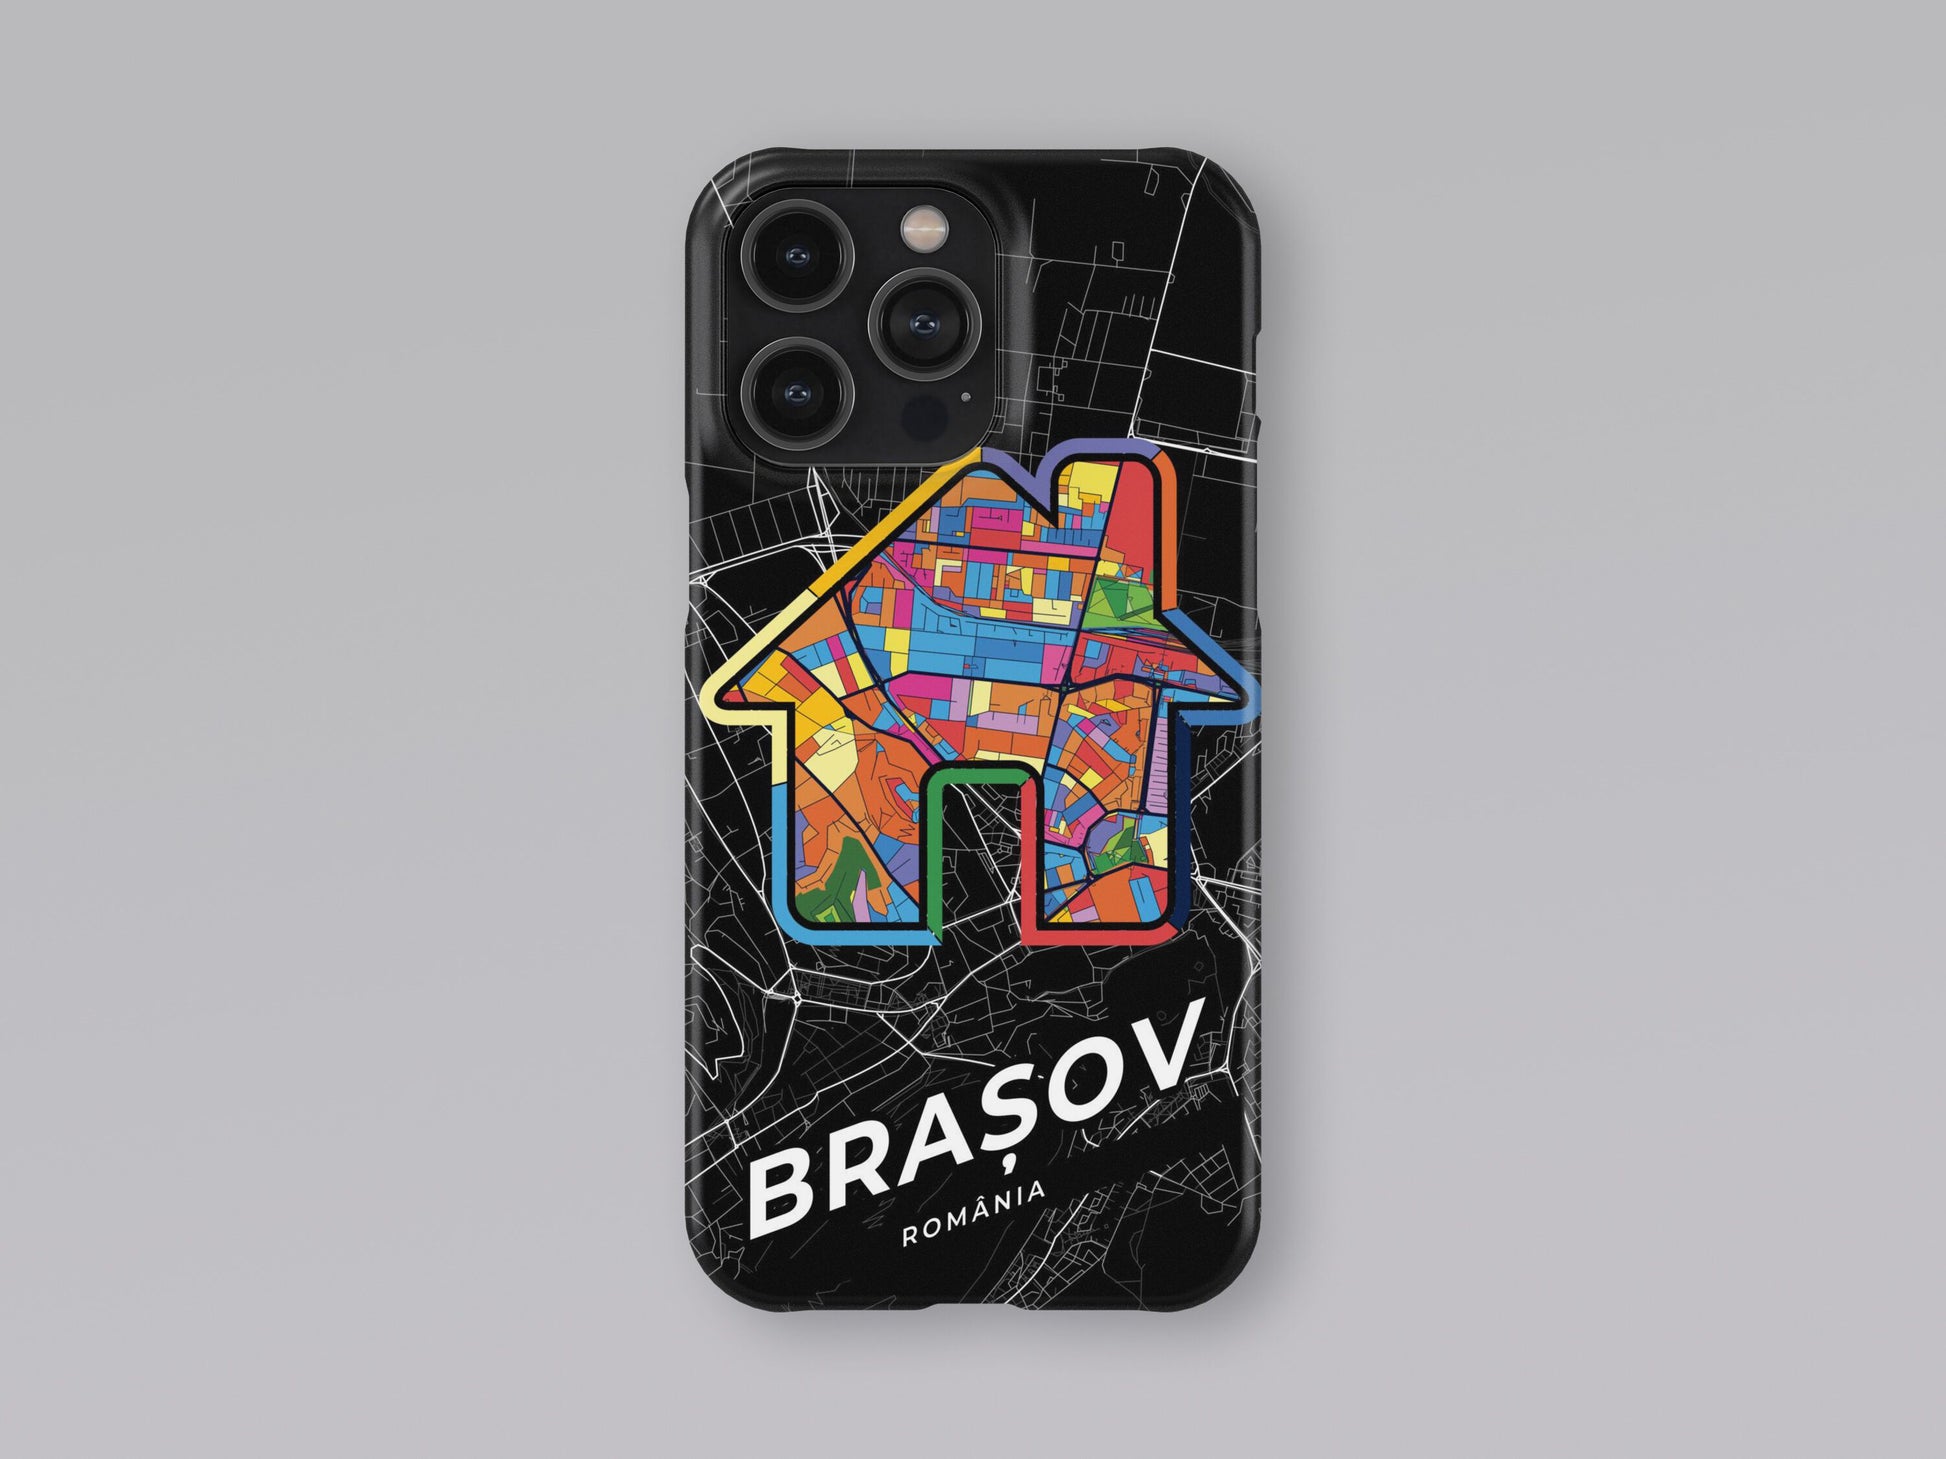 Brașov Romania slim phone case with colorful icon. Birthday, wedding or housewarming gift. Couple match cases. 3